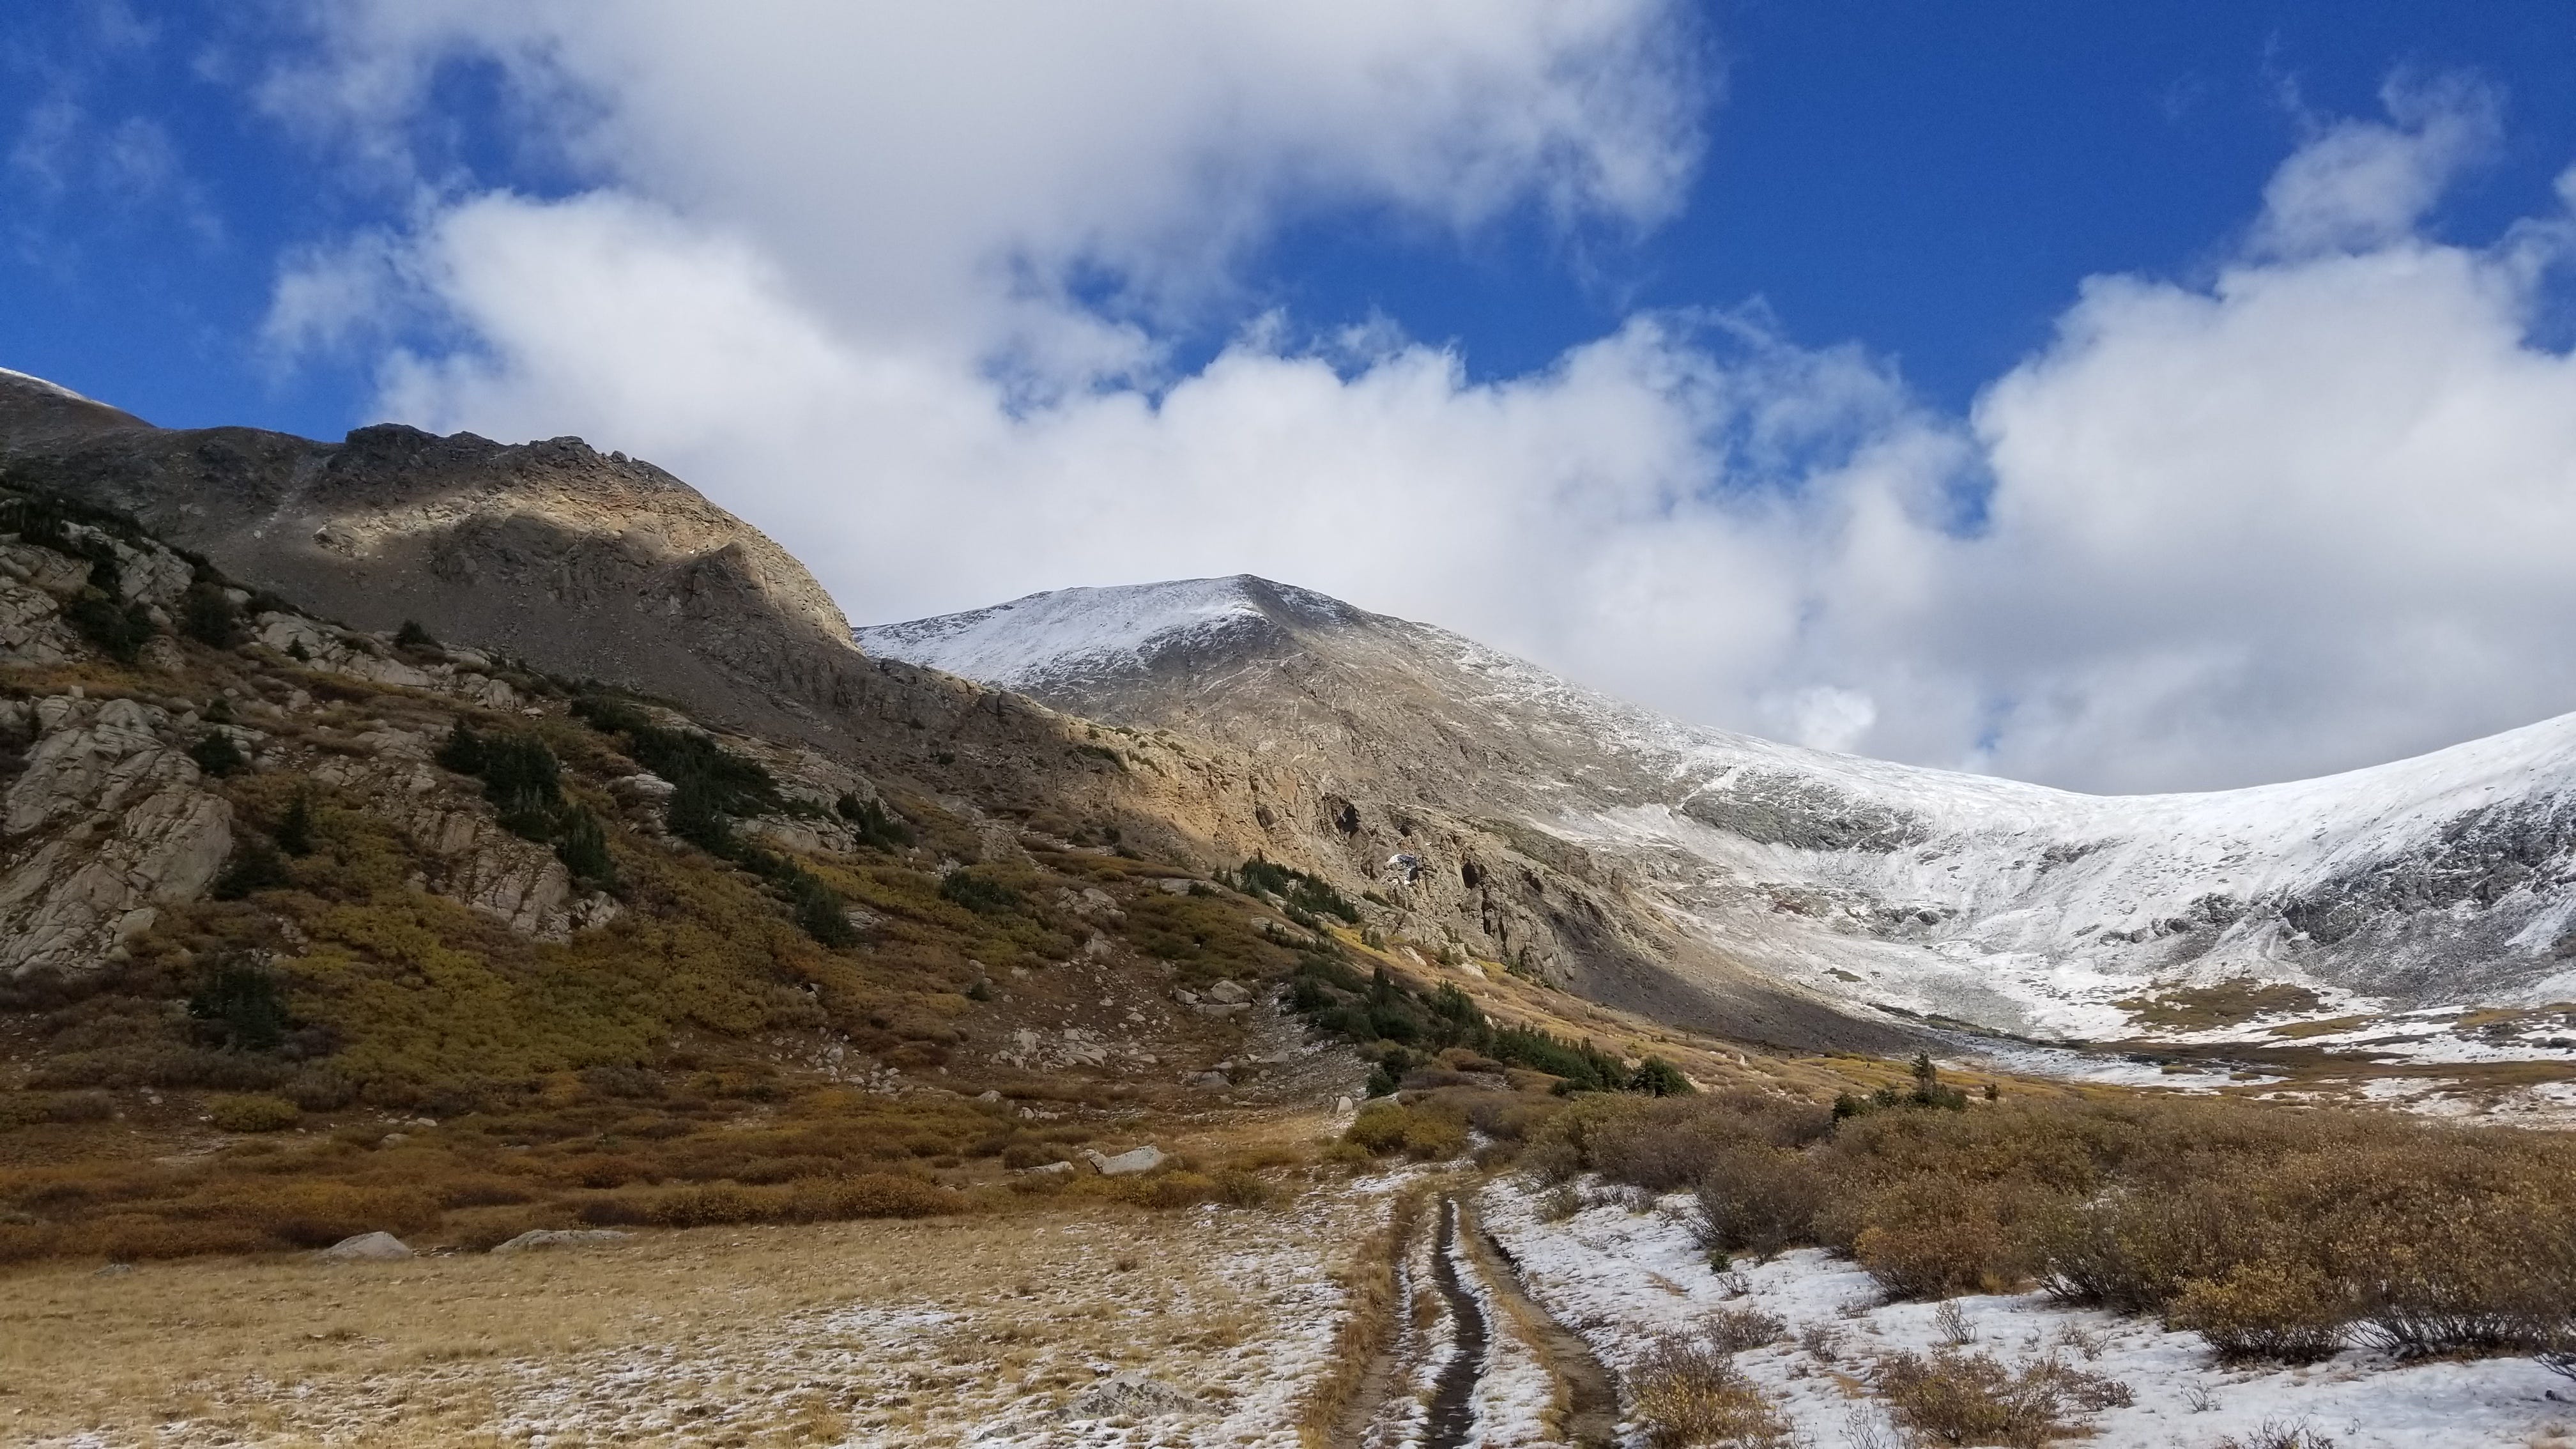 a pathway winds toward a mountaintop, covered in a dusting of fresh, late autumn snow